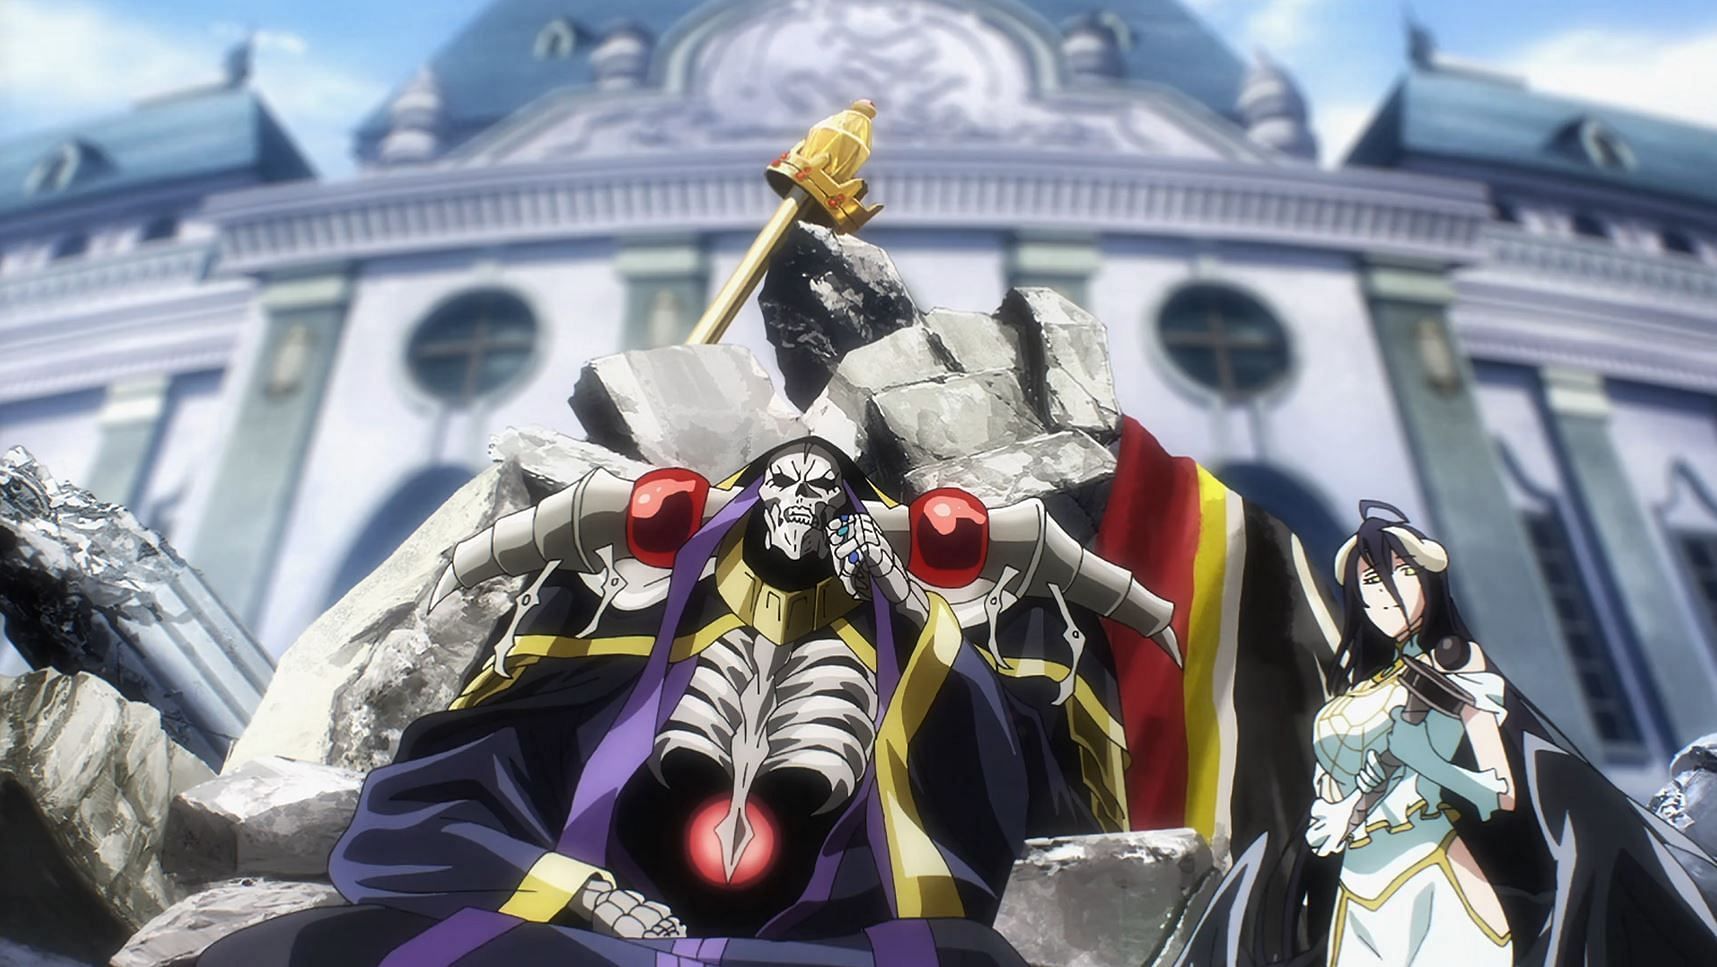 Ainz Ooal Gown and Albedo - Overlord IV (Image via Madhouse)